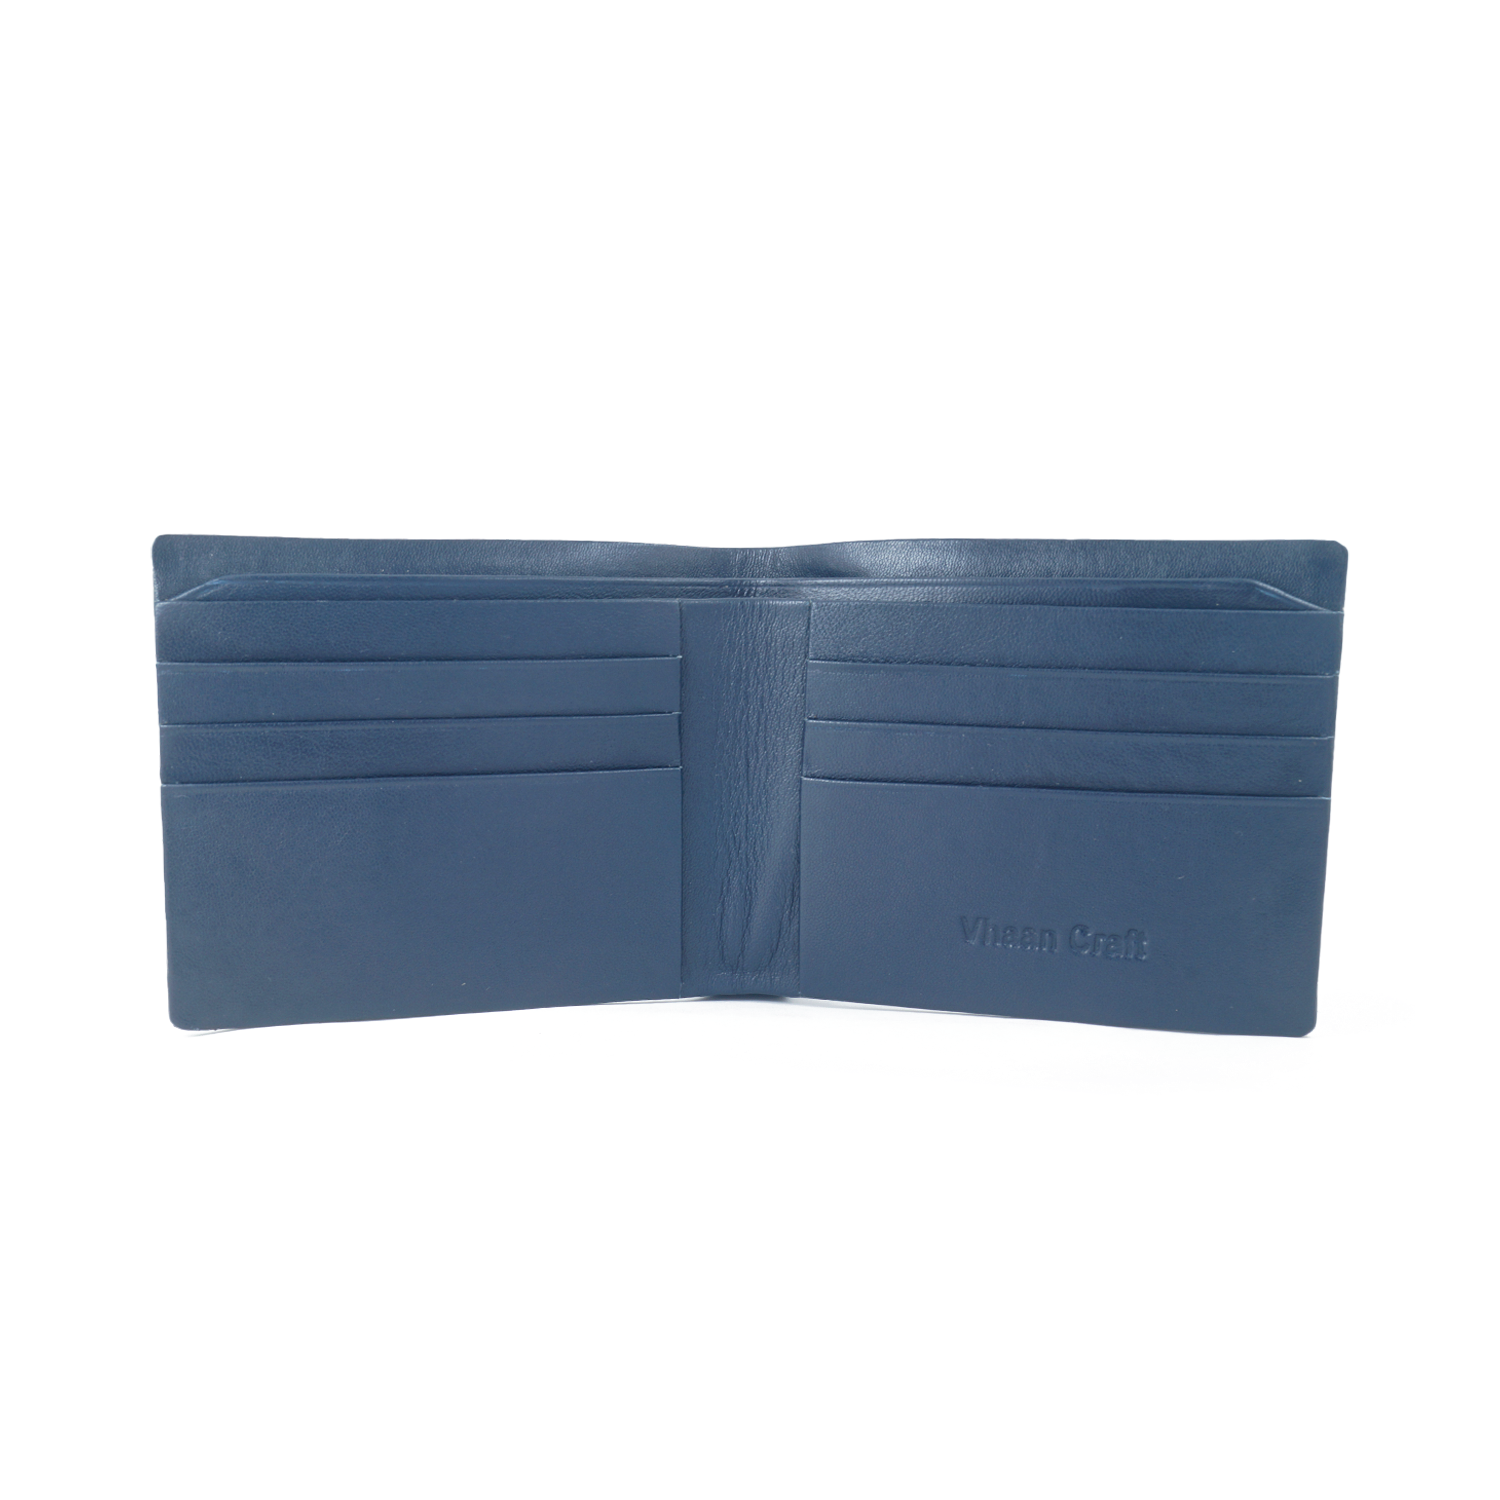 Seamless Elegance: RFID-Protected Stitchless NAPPA Leather Wallets - Blue